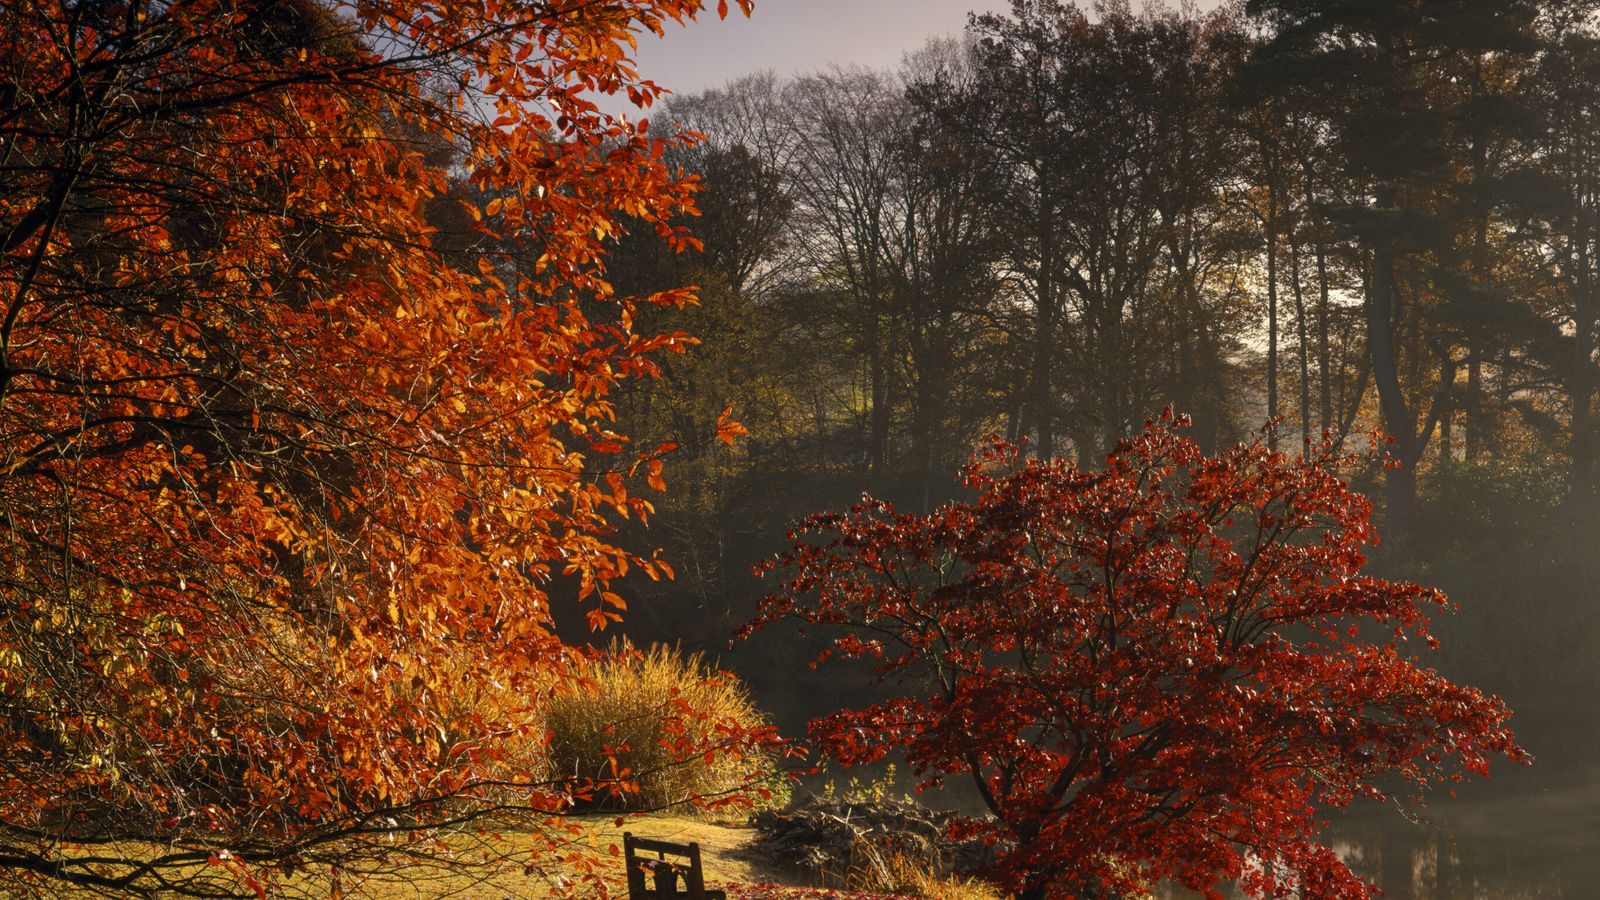 National Trust says that autumn colours will be unique